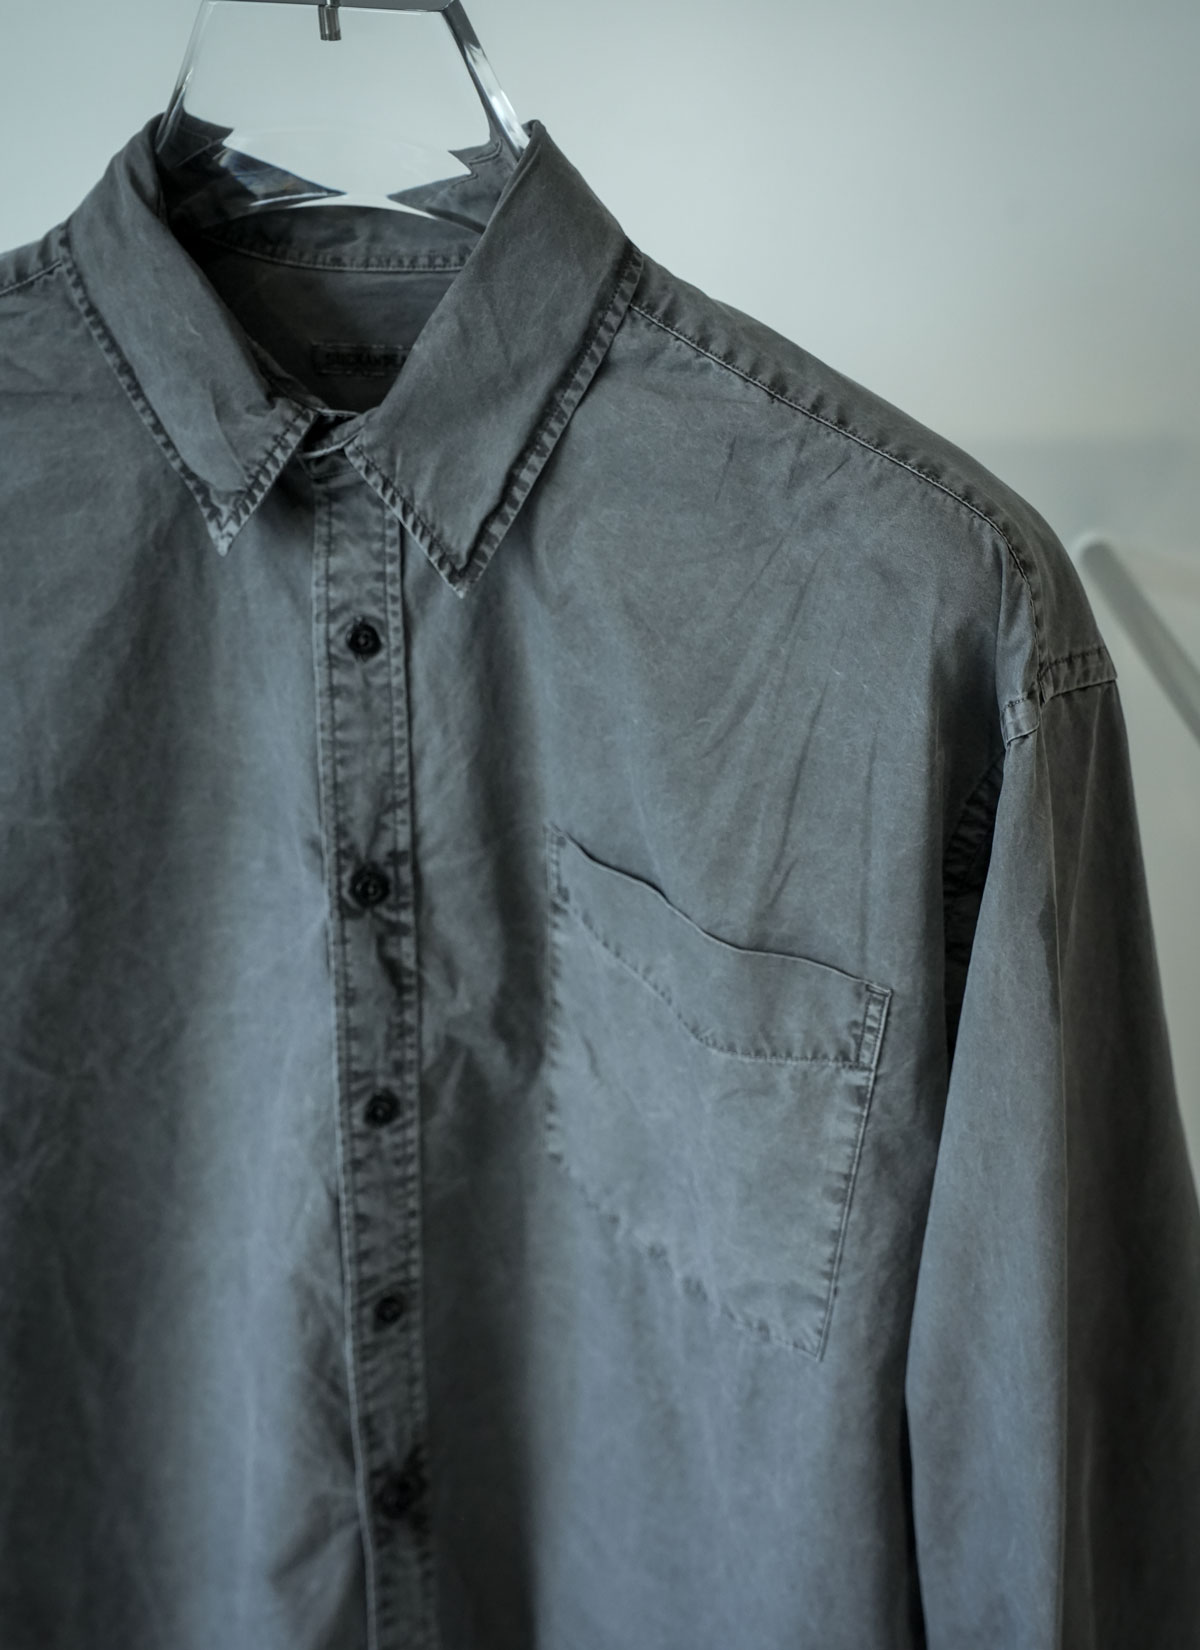 Siesta Shirt Vintage Dyed in Charcoal